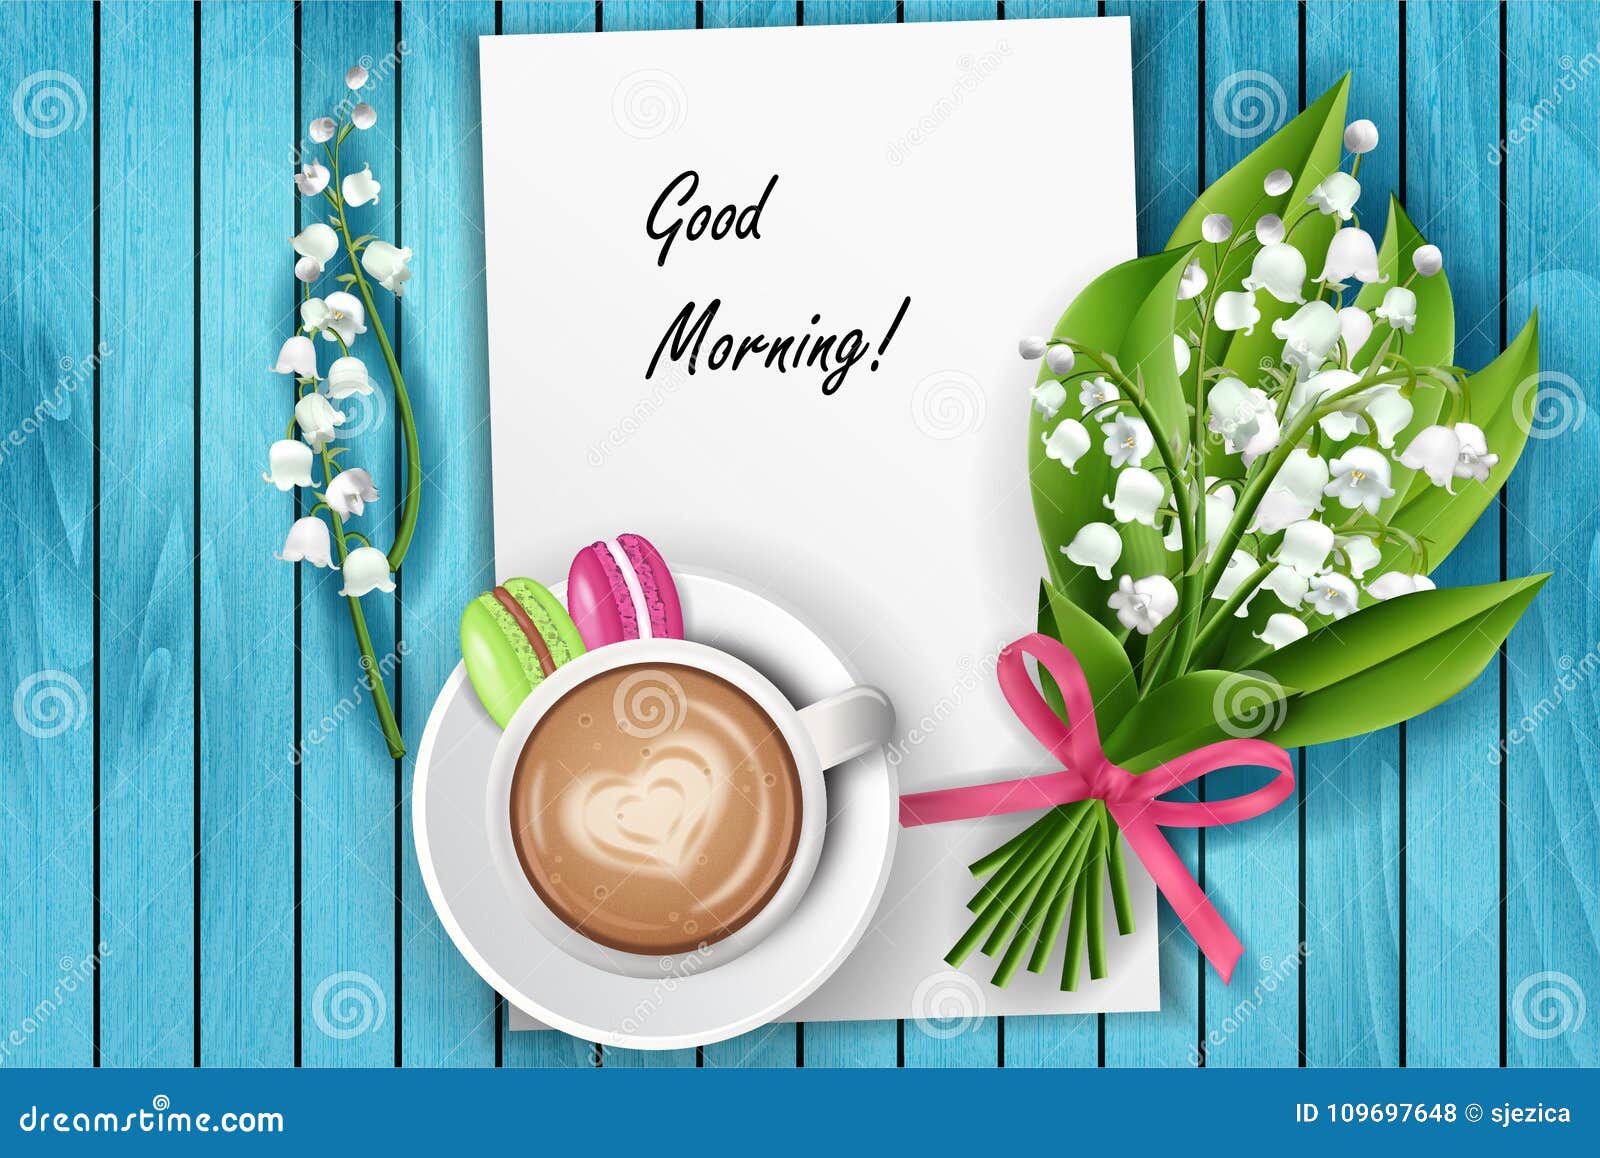 Good Morning Coffee Table Top View Stock Vector - Illustration of ...